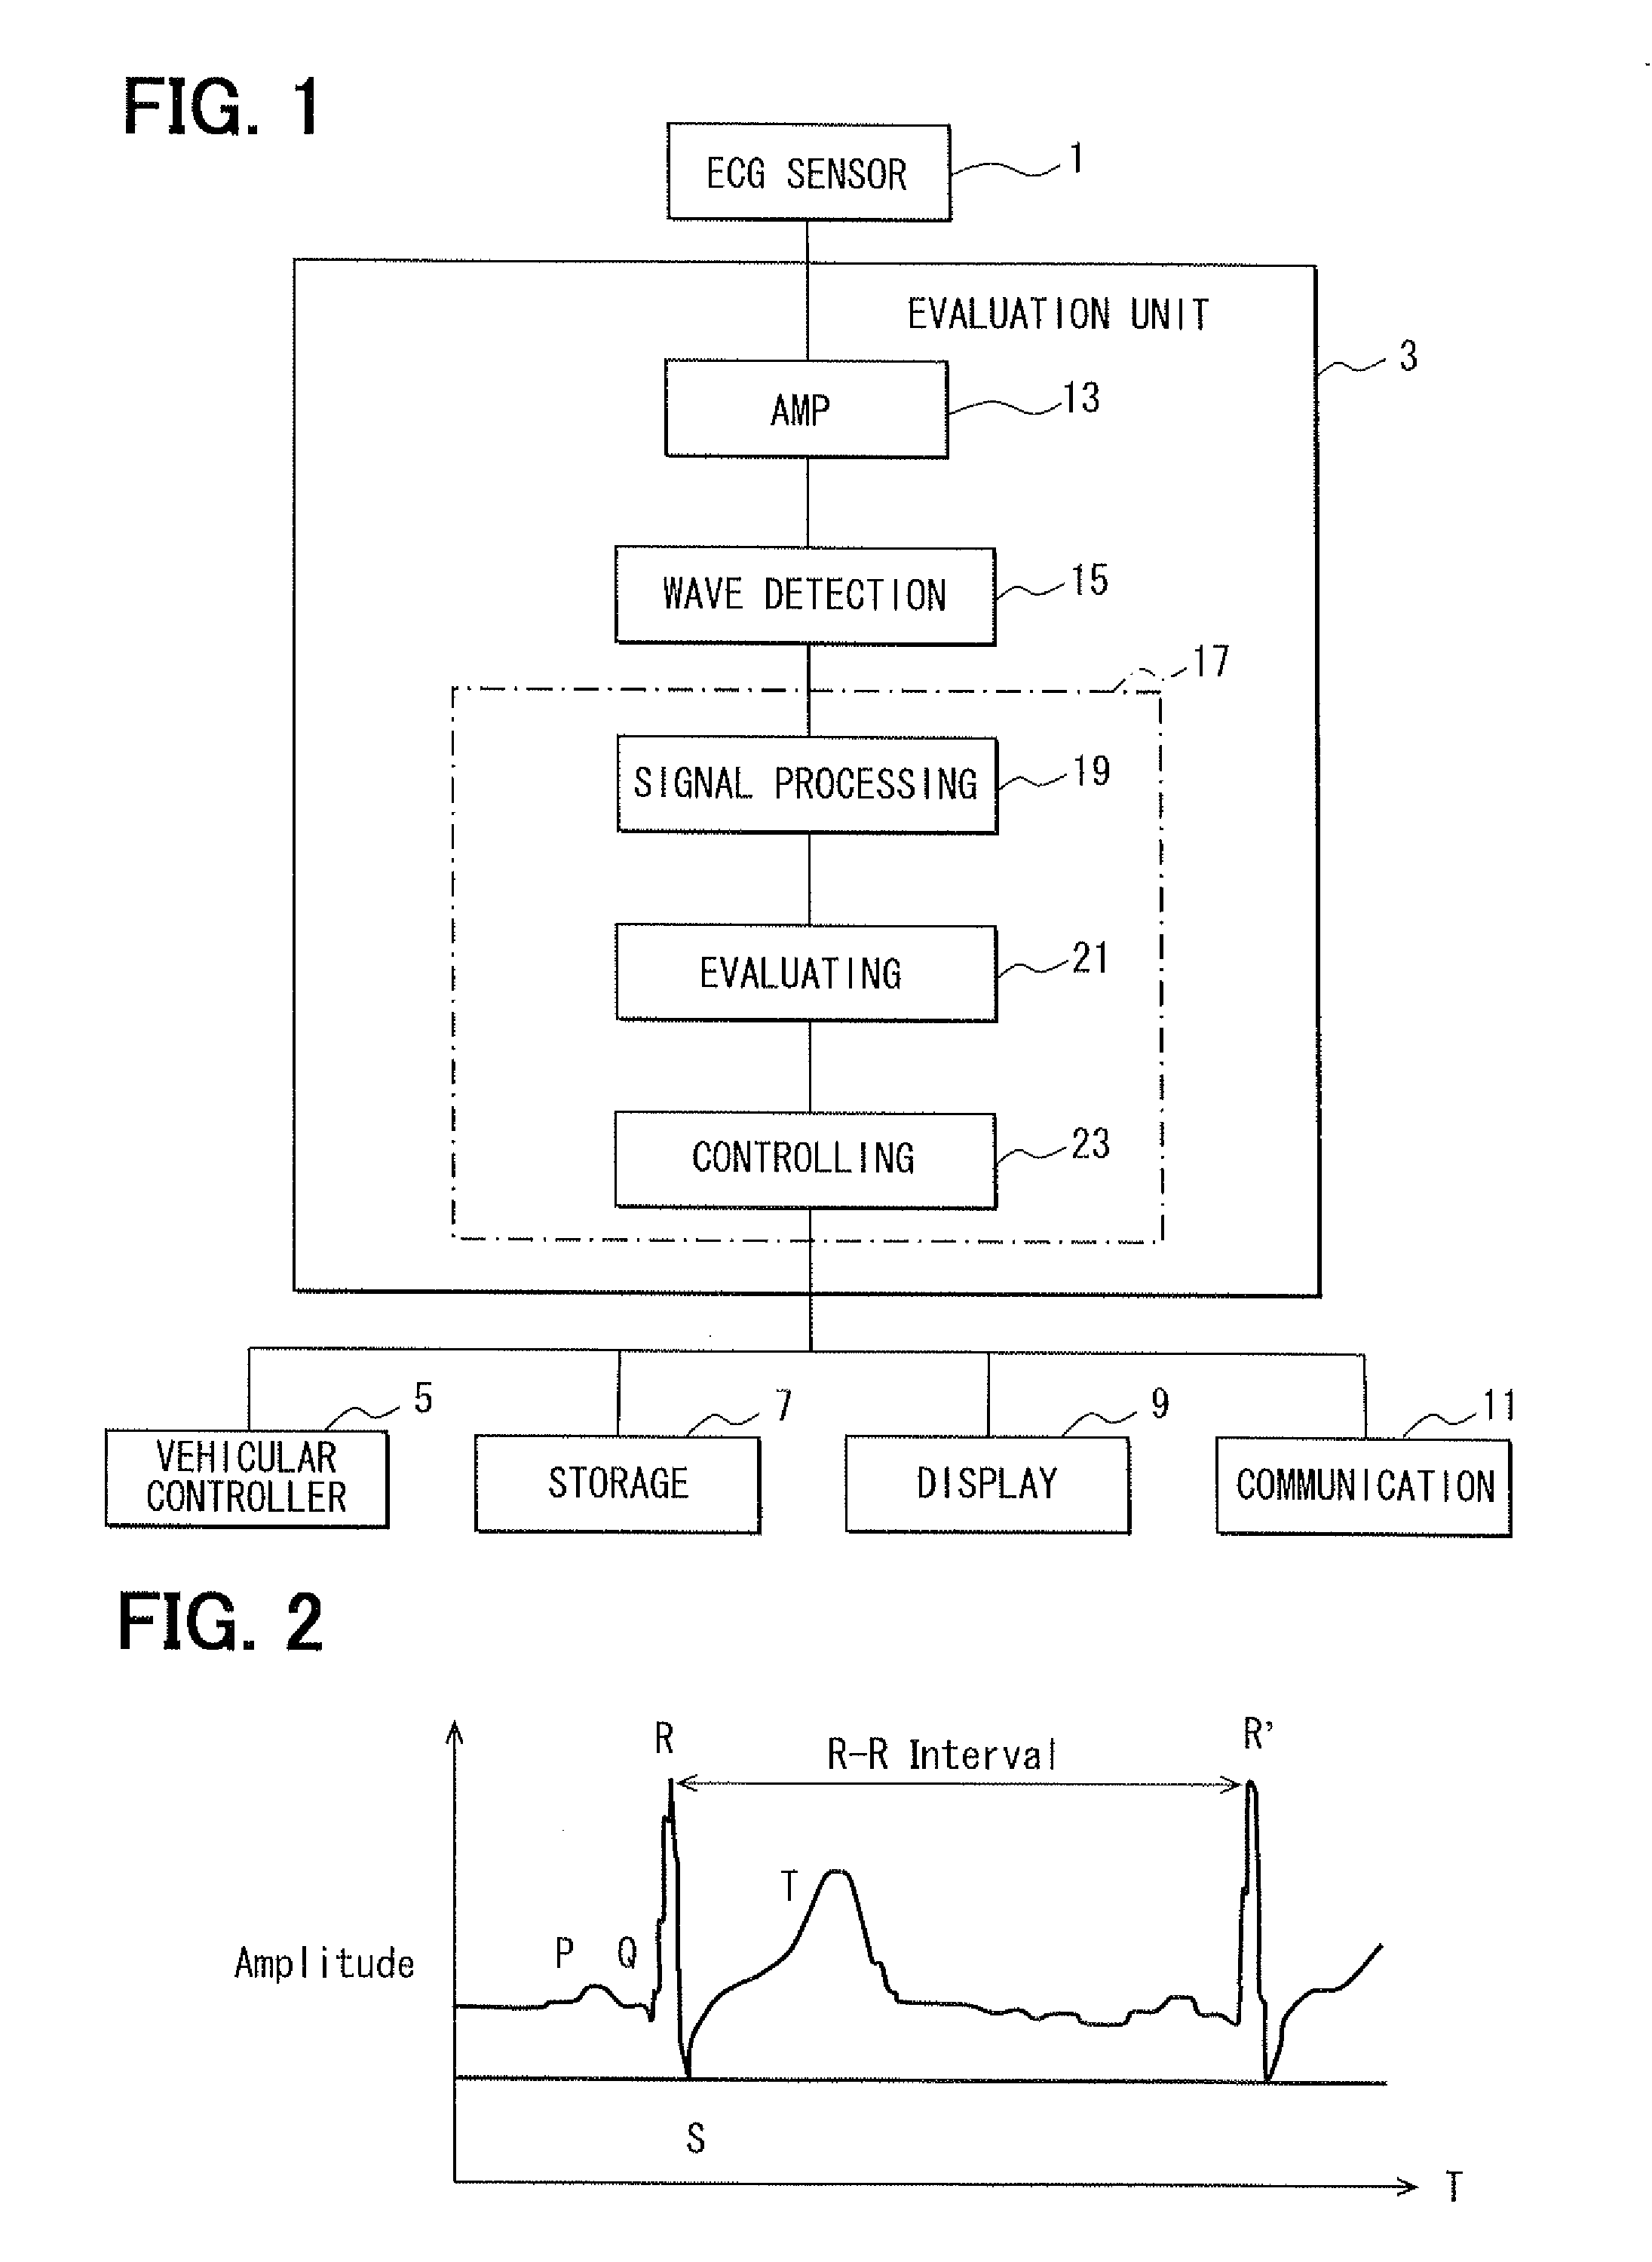 Apparatus for evaluating biological condition, method for the same, and computer program product